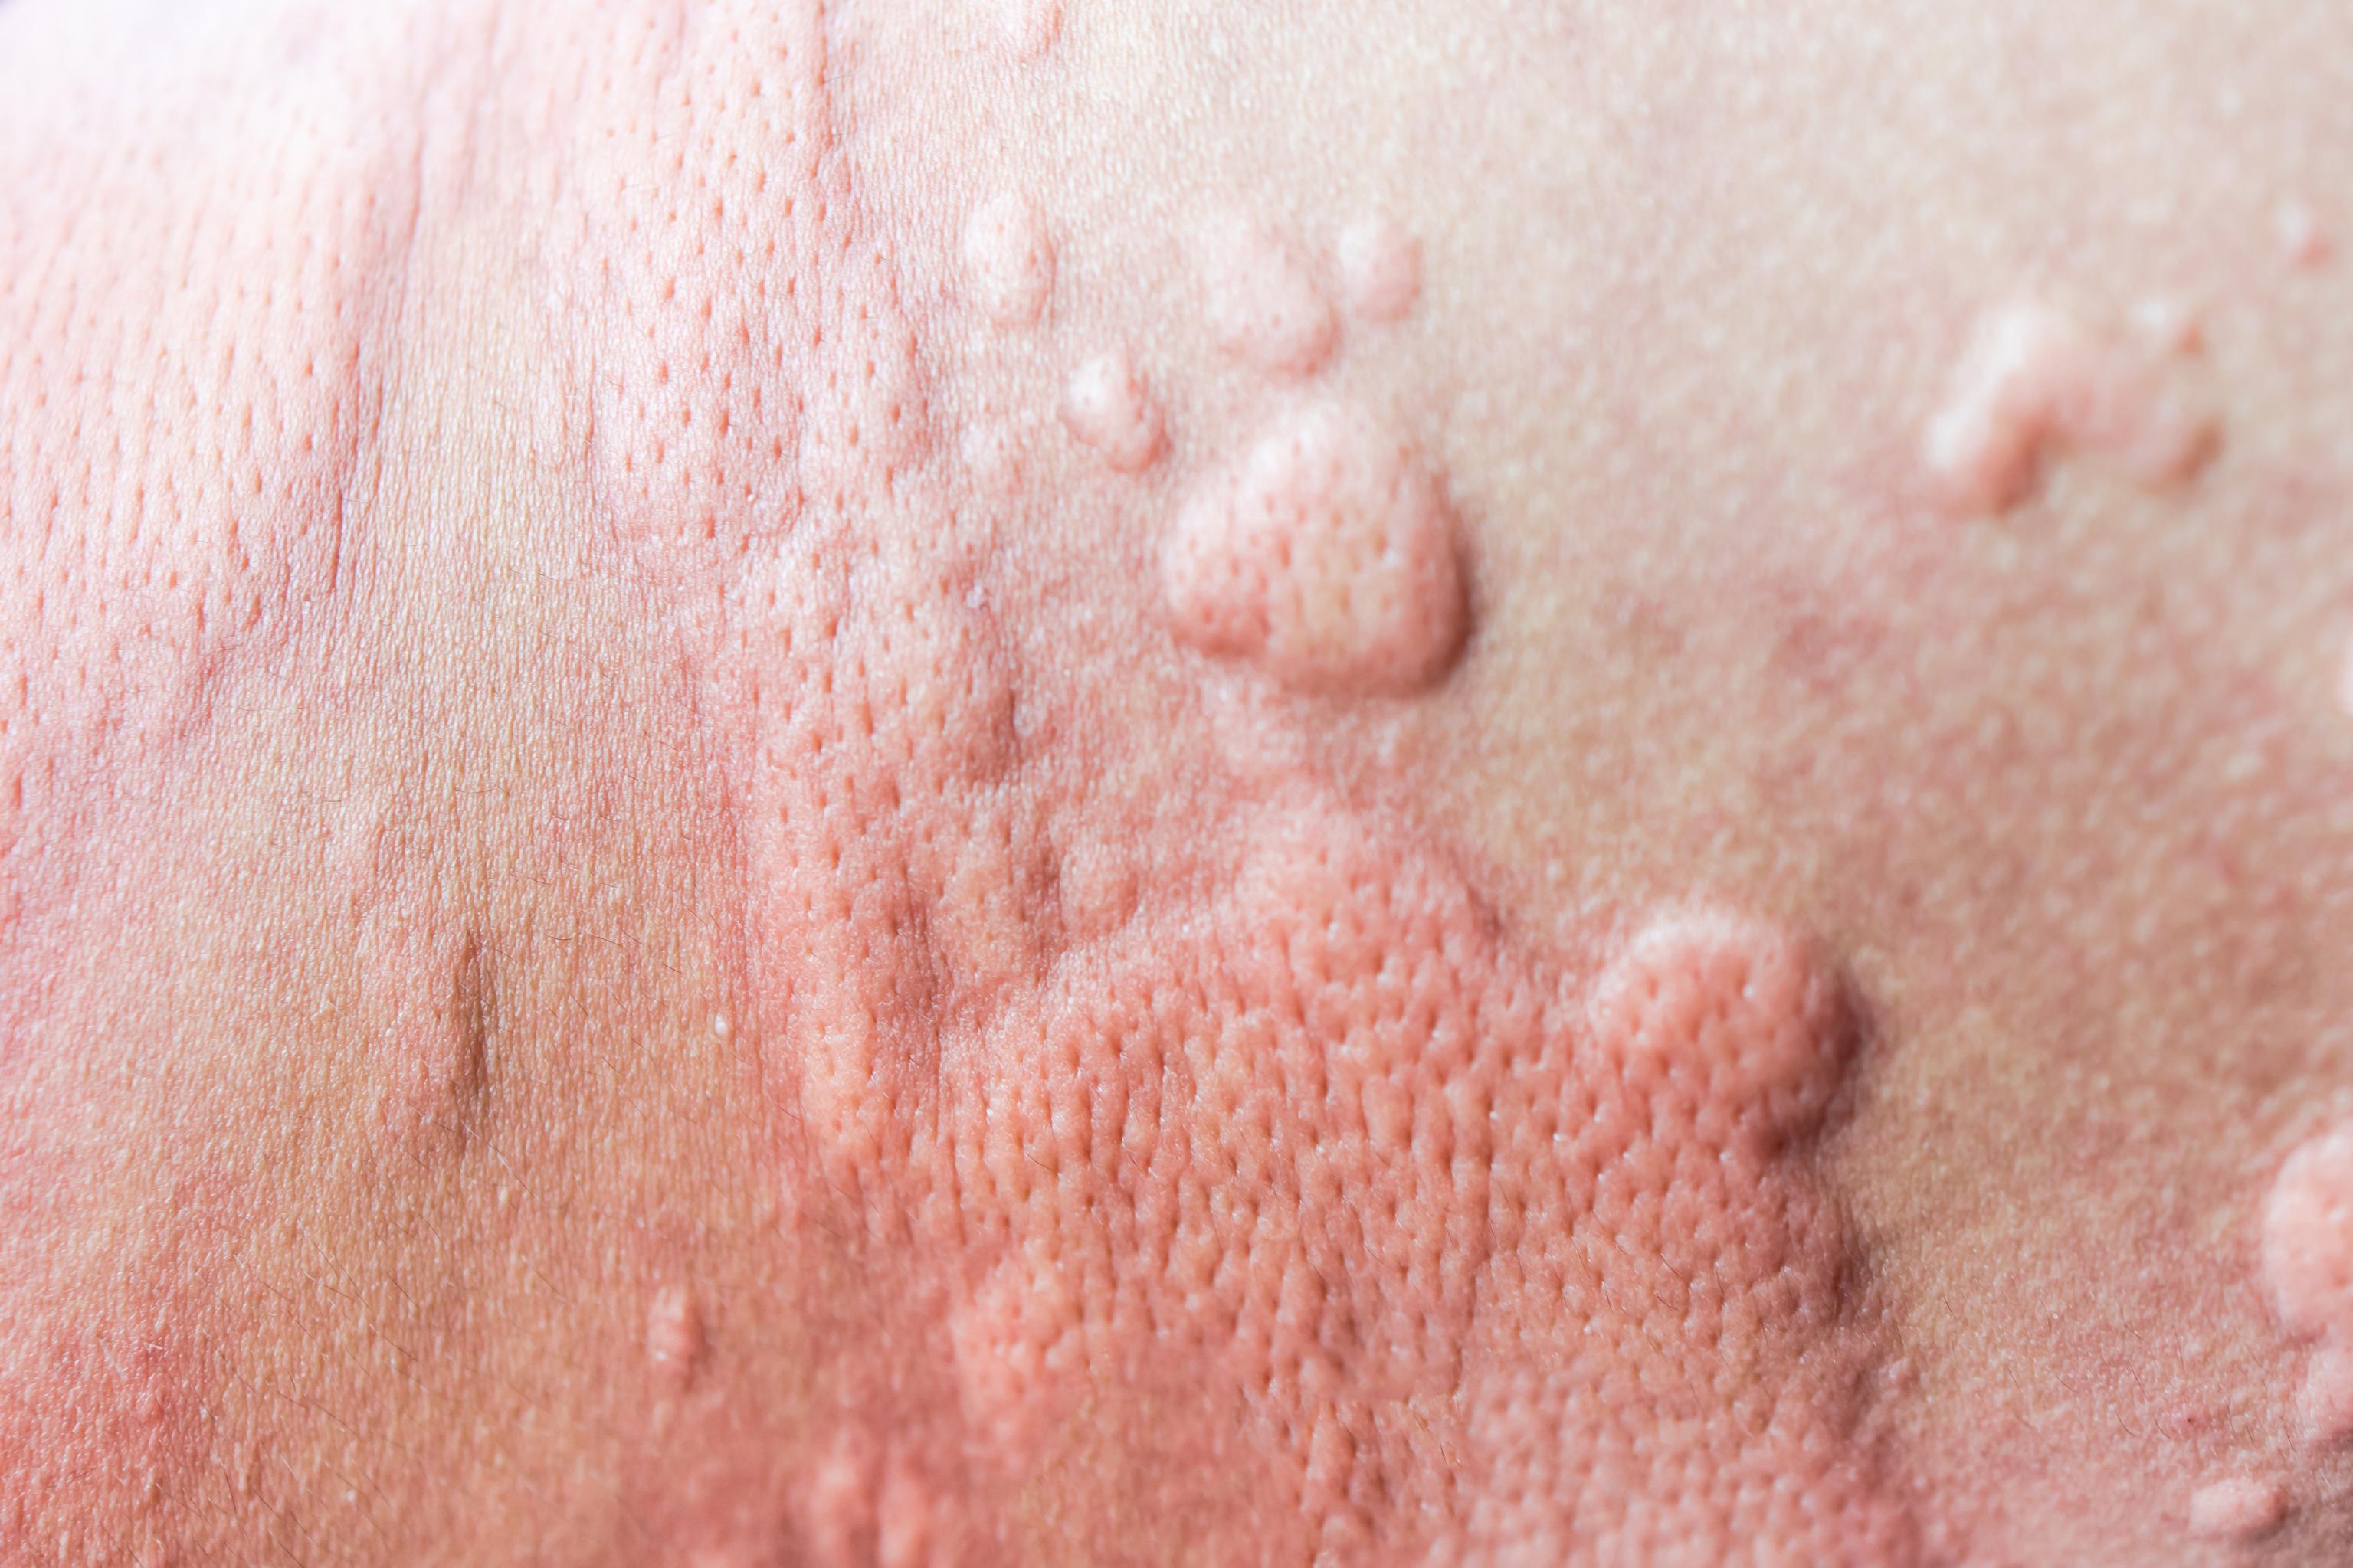 Can You Get Hives From Stress?